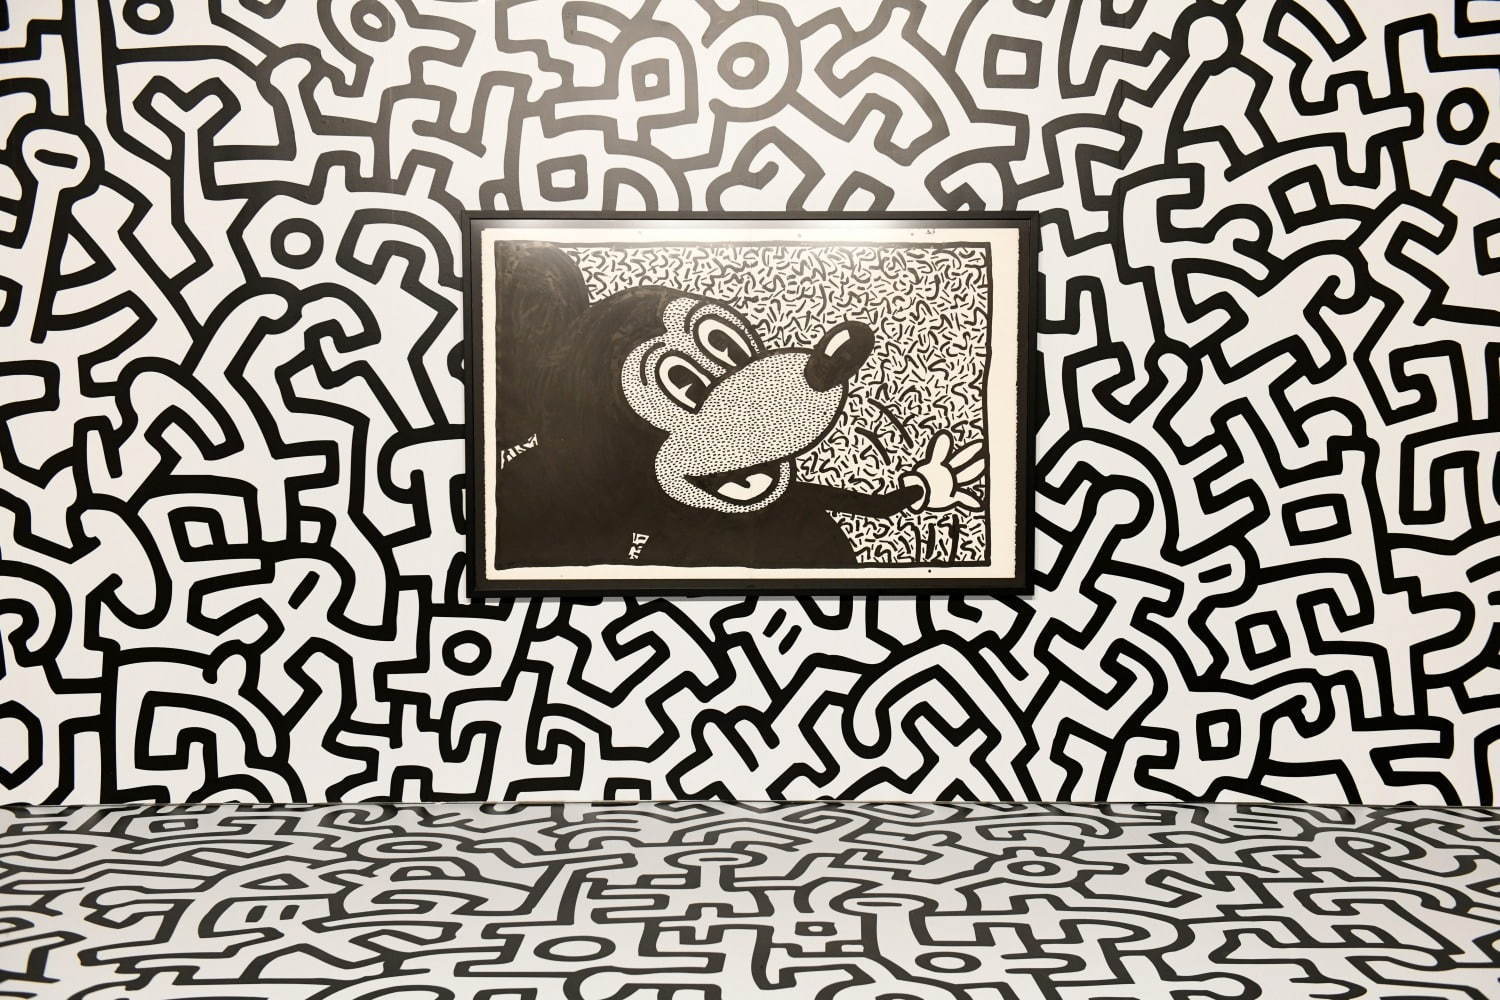 Keith Haring"Untitled(Mickey Mouse) "
Private Collection, Courtesy Lio Malca, New York
※ニューヨーク展での展示風景